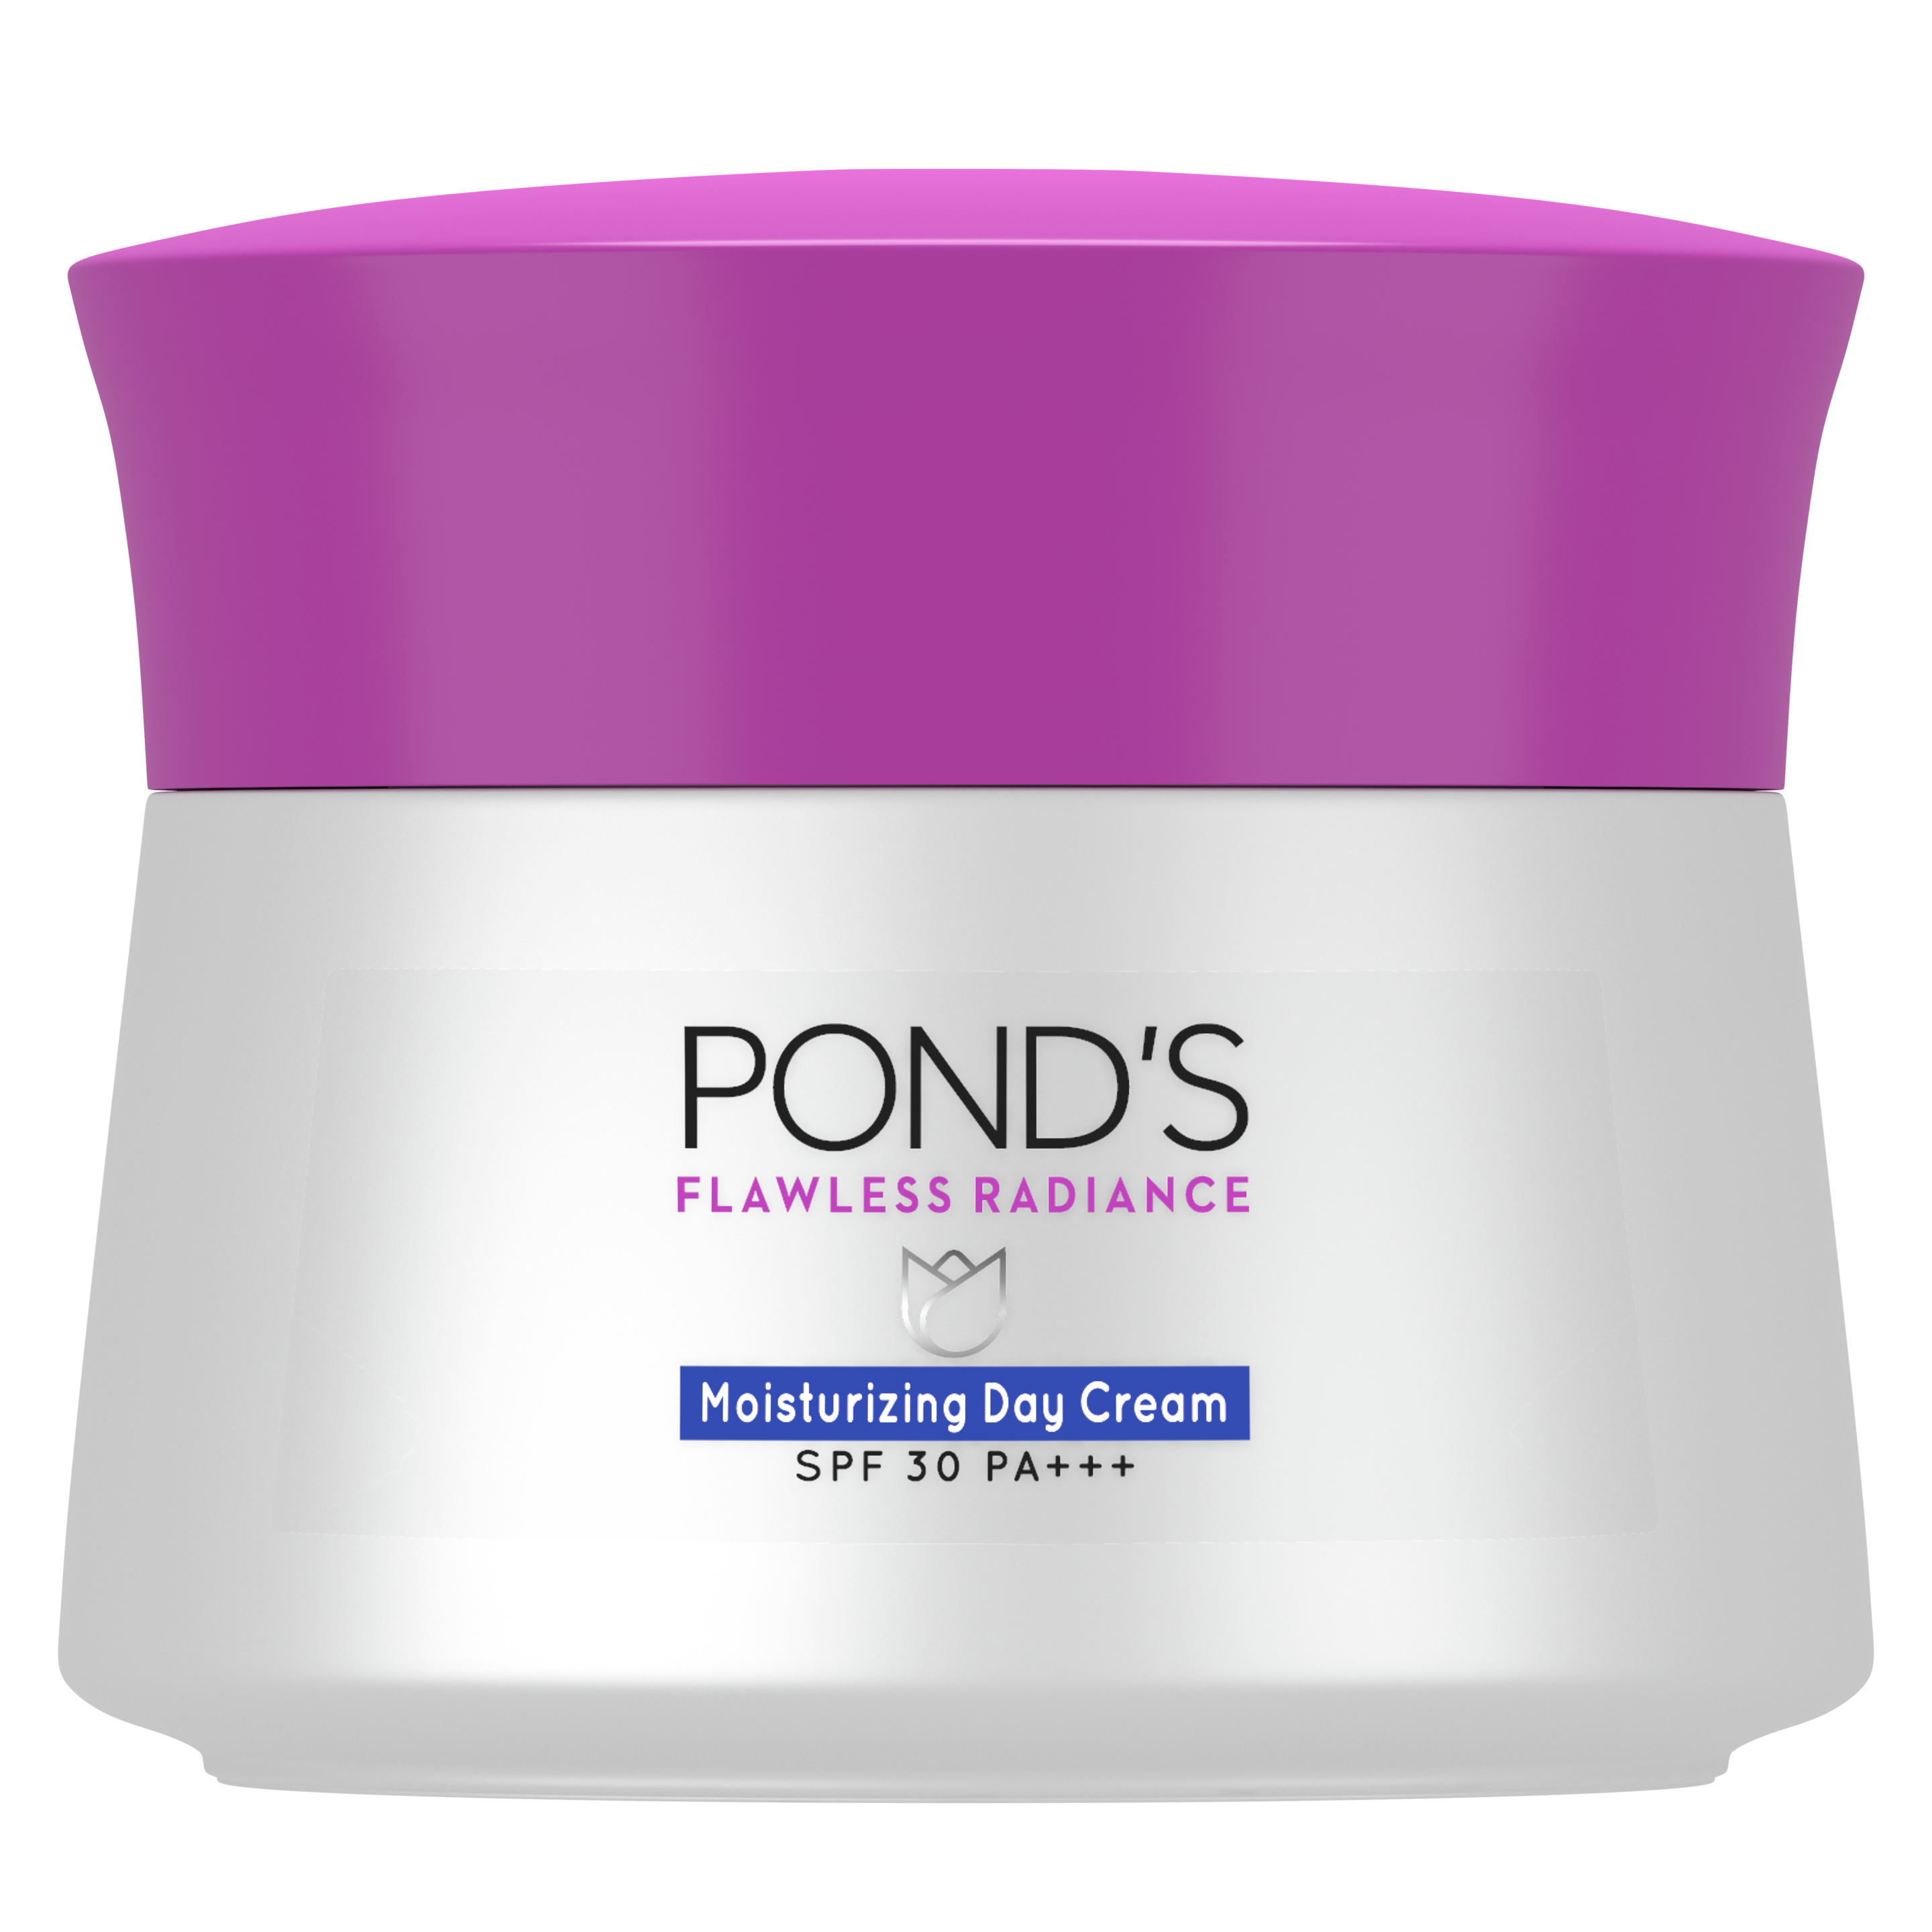 Crema Humectante Antimanchas Día Ponds Flawless Radiance